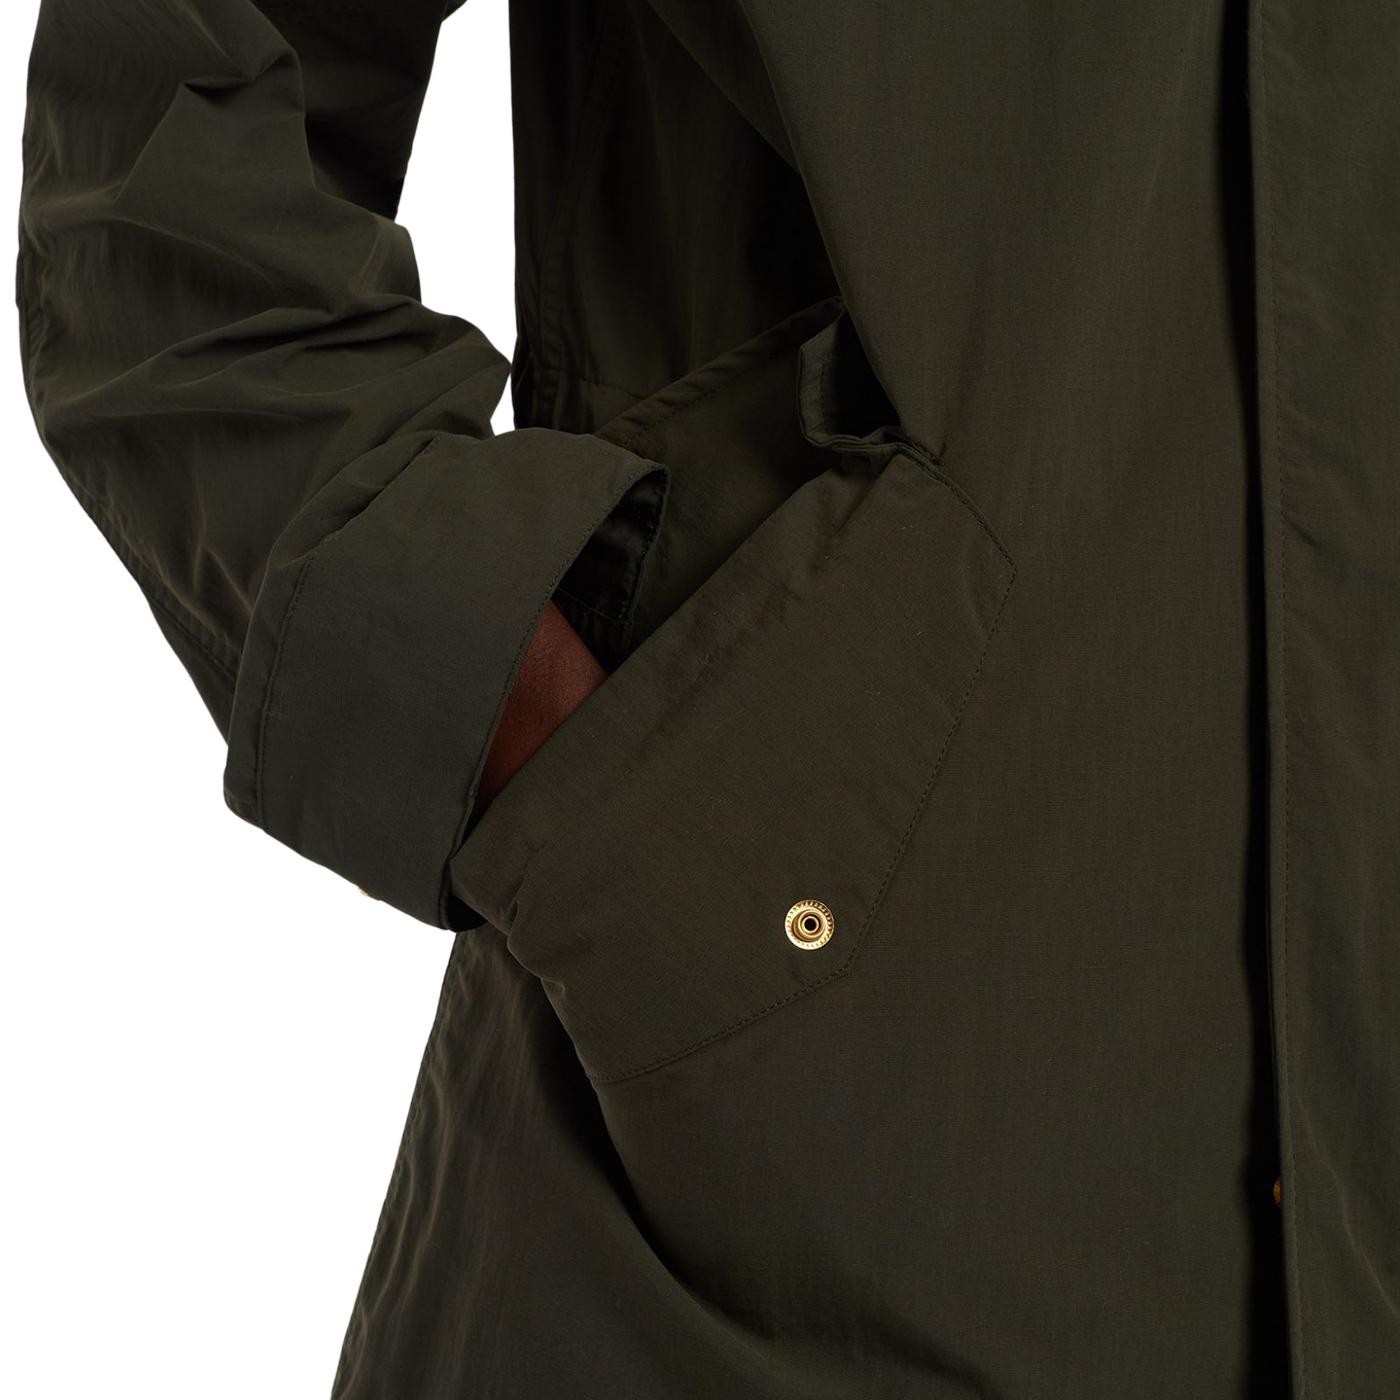 FRED PERRY Mod Shell Fishtail Parka Jacket (HG)